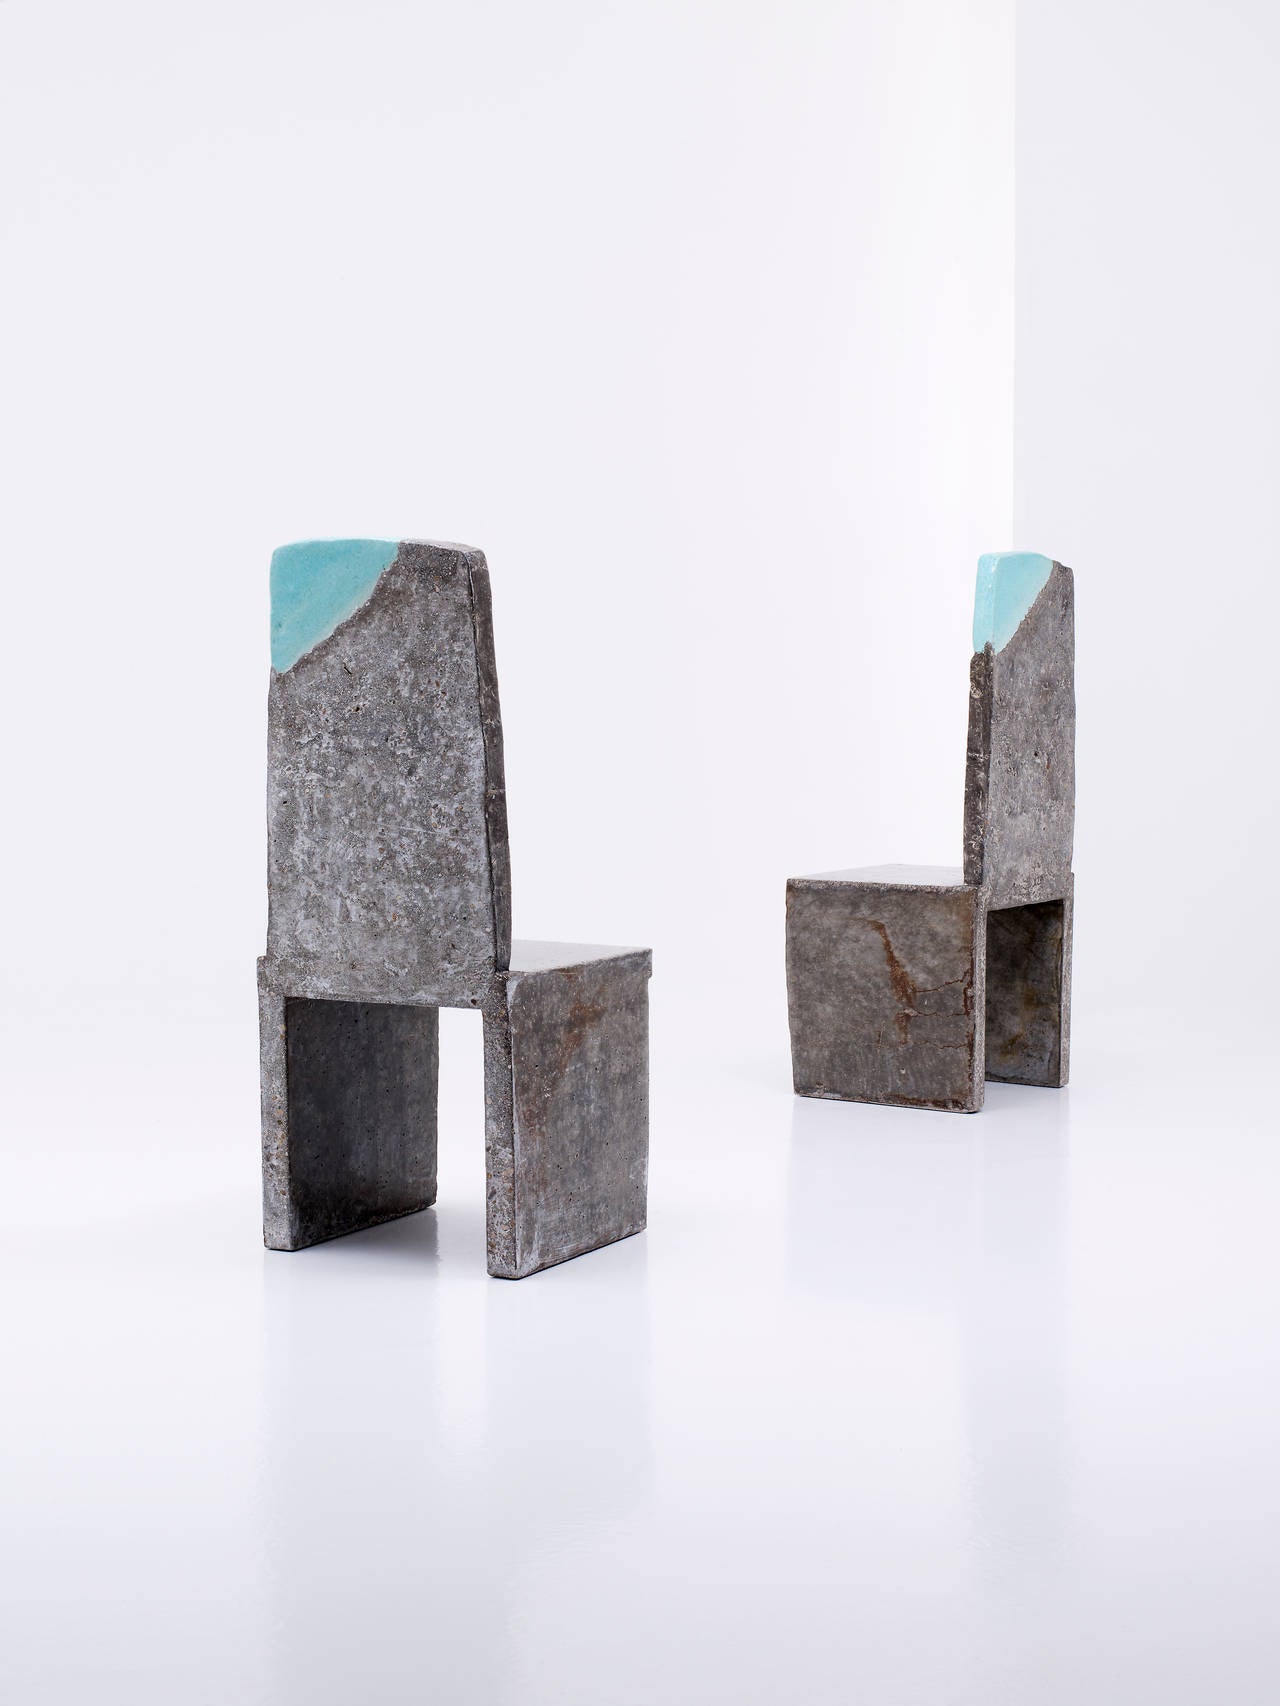 Unique Indoor/Outdoor Concrete Glazed Ceramic Chair by Lee Hun Chung, 2011 For Sale 2